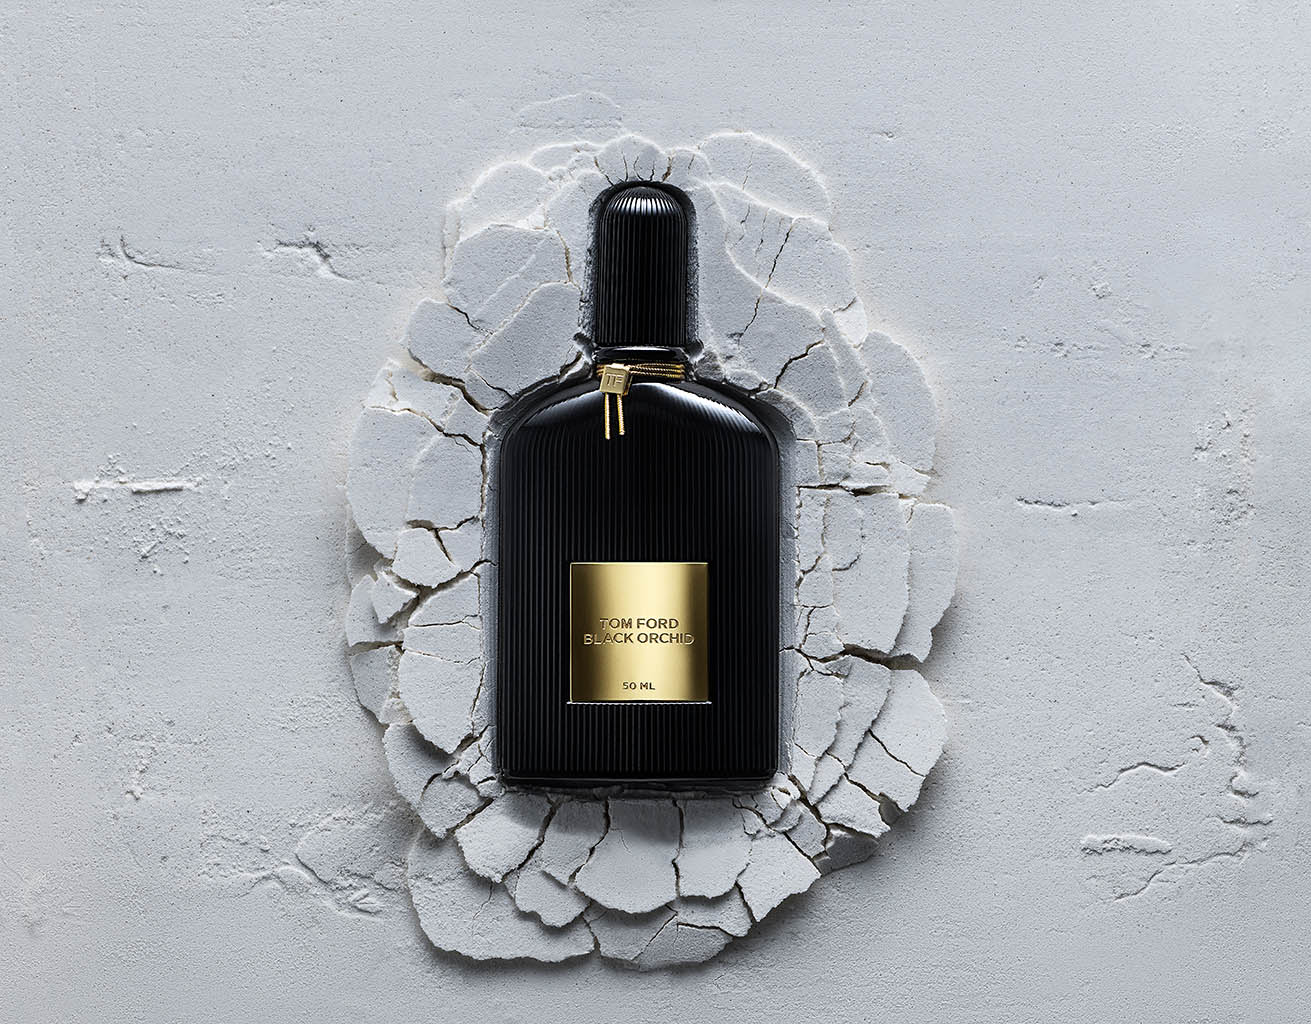 Liquid / Smoke Photography of Tom Ford Black Orchid fragrance bottle by Packshot Factory